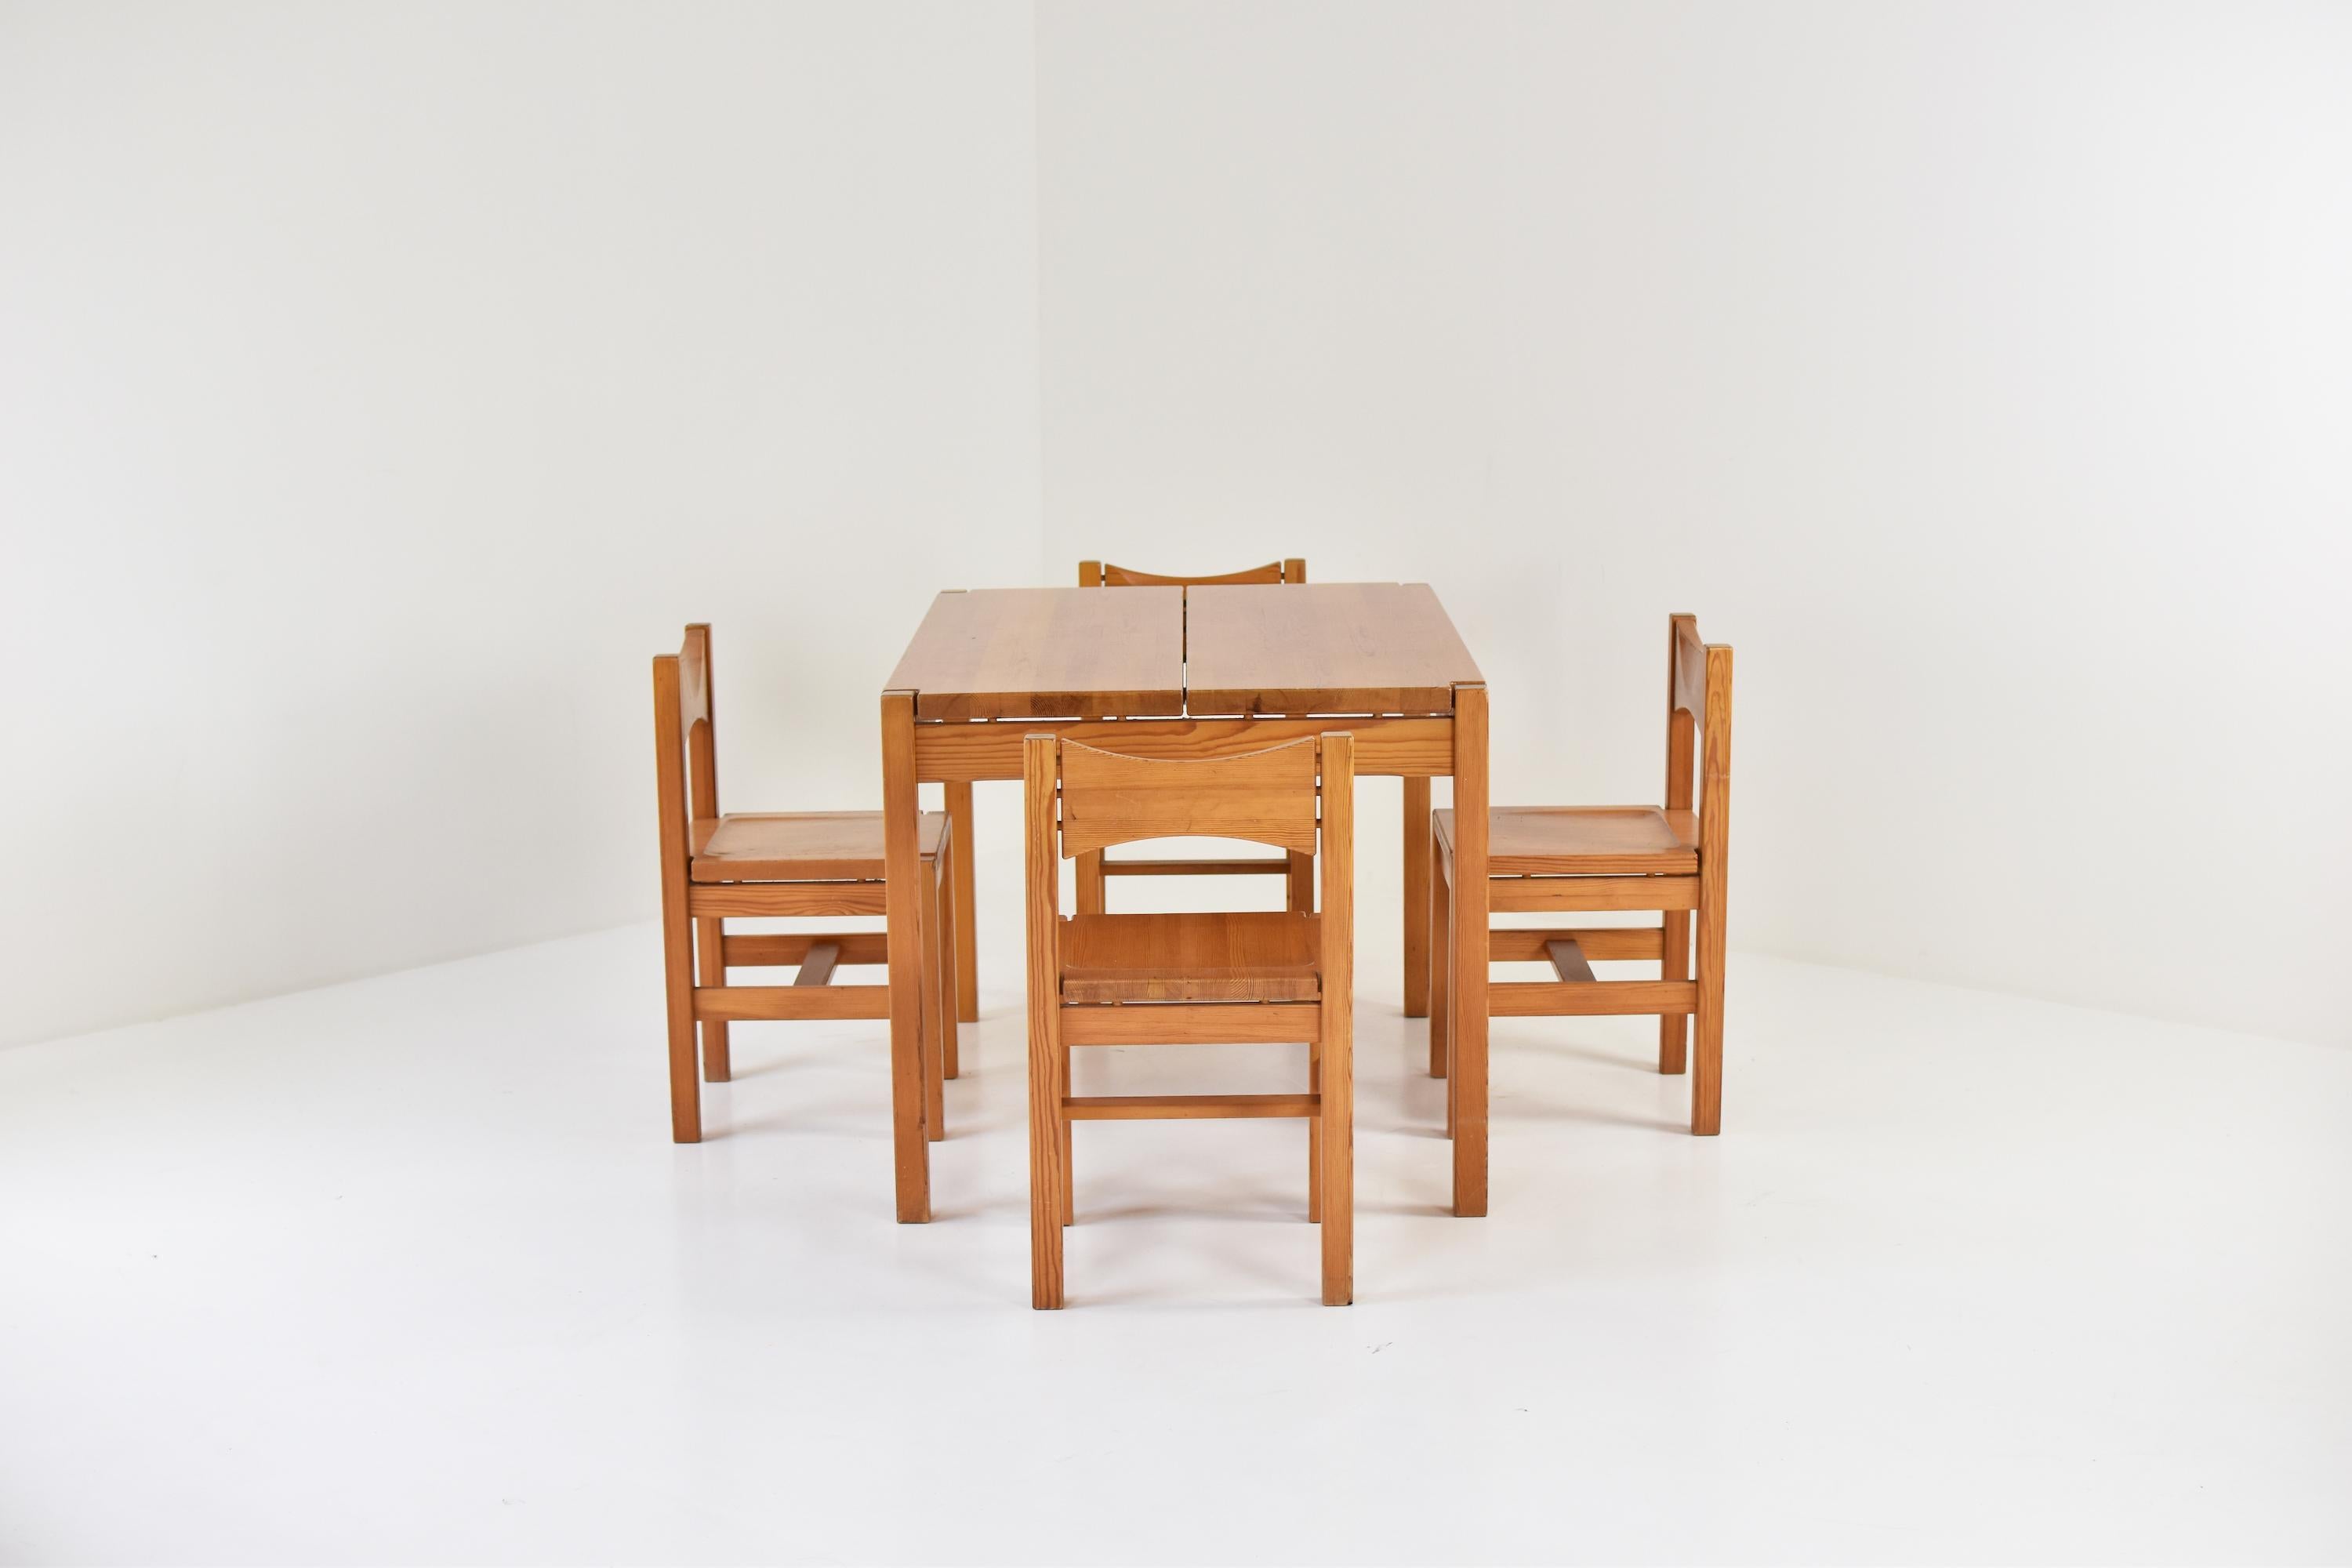 Dining set designed by Ilmari Tapiovaara for Laukaan Puu, Finland 1963. Consists of a dining table, a bench and 4 stools. All in solid pine with very nice patina. Elegant and simplistic design. In good condition with some age related